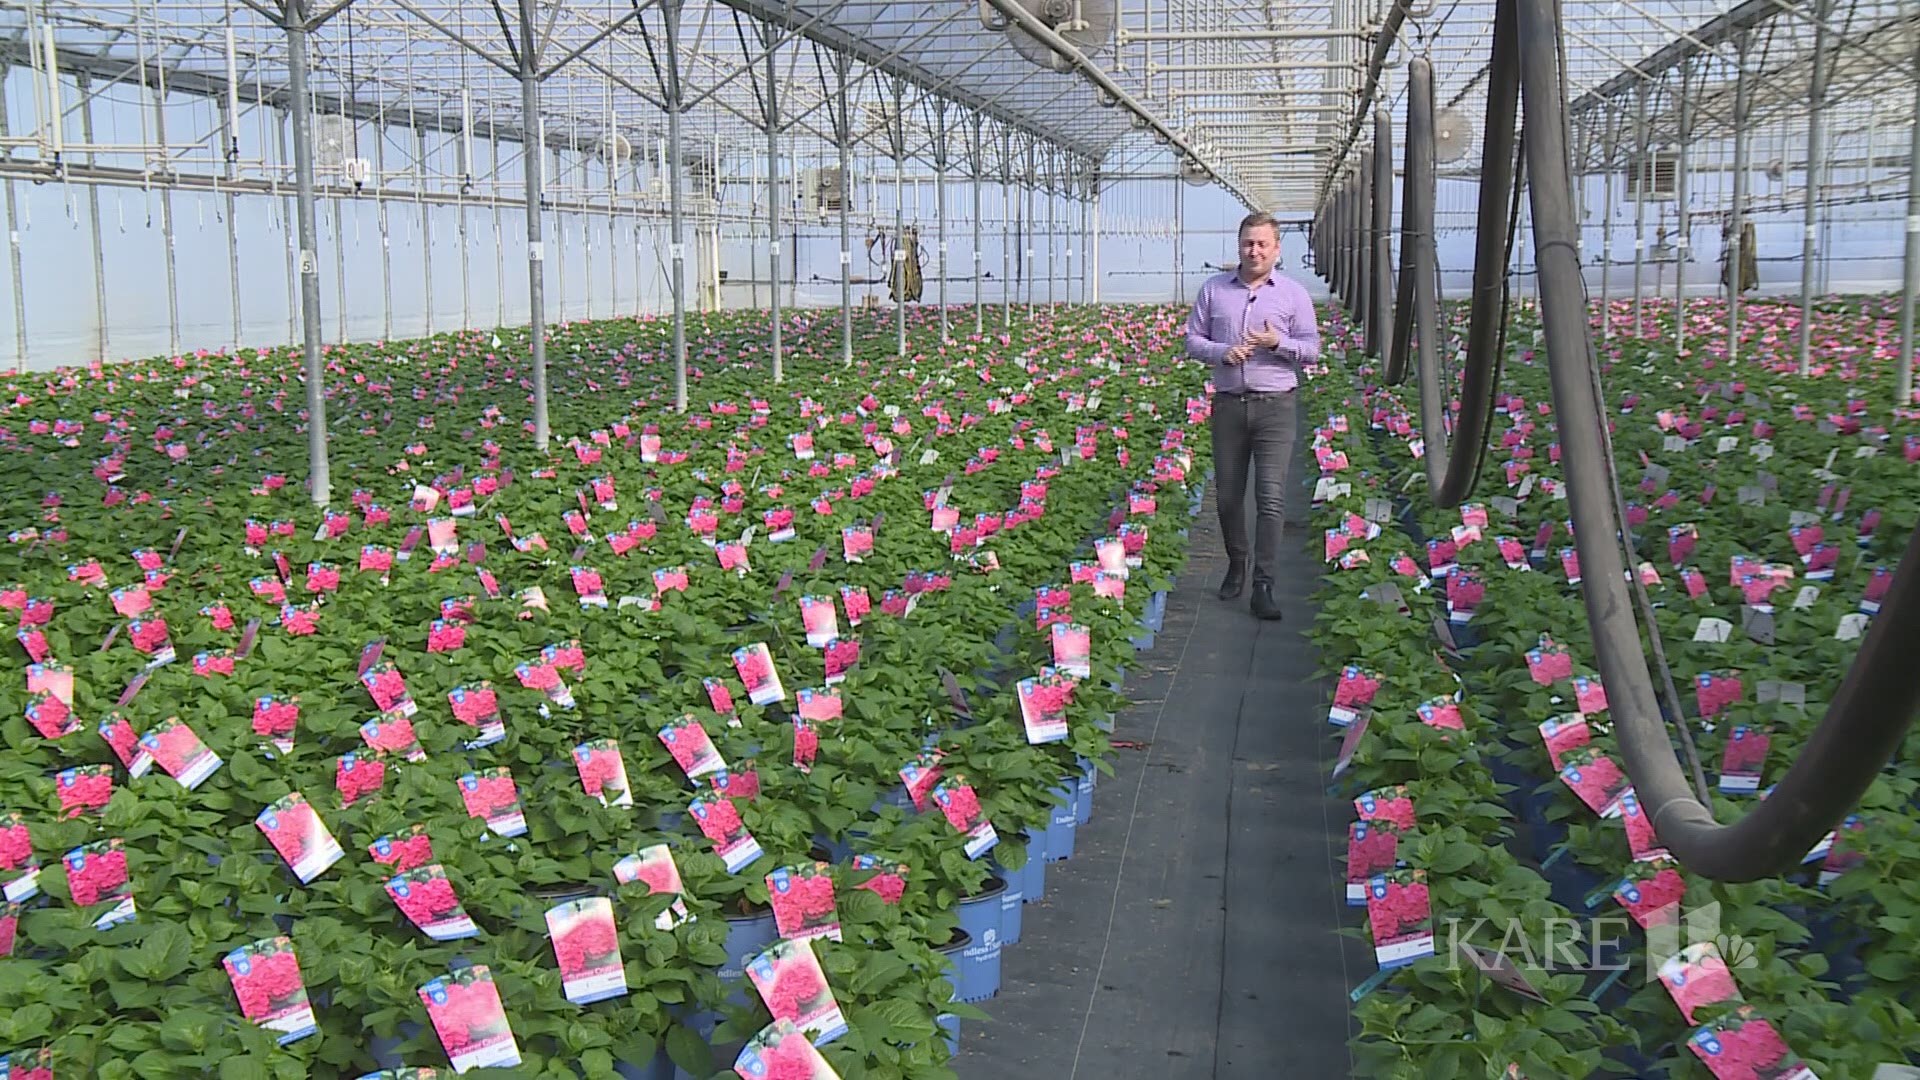 We took a trip to Bailey Nurseries in Cottage Grove to get a look at what's blooming and what we can do to get our gardens ready for spring planting. https://kare11.tv/2UCI3IZ